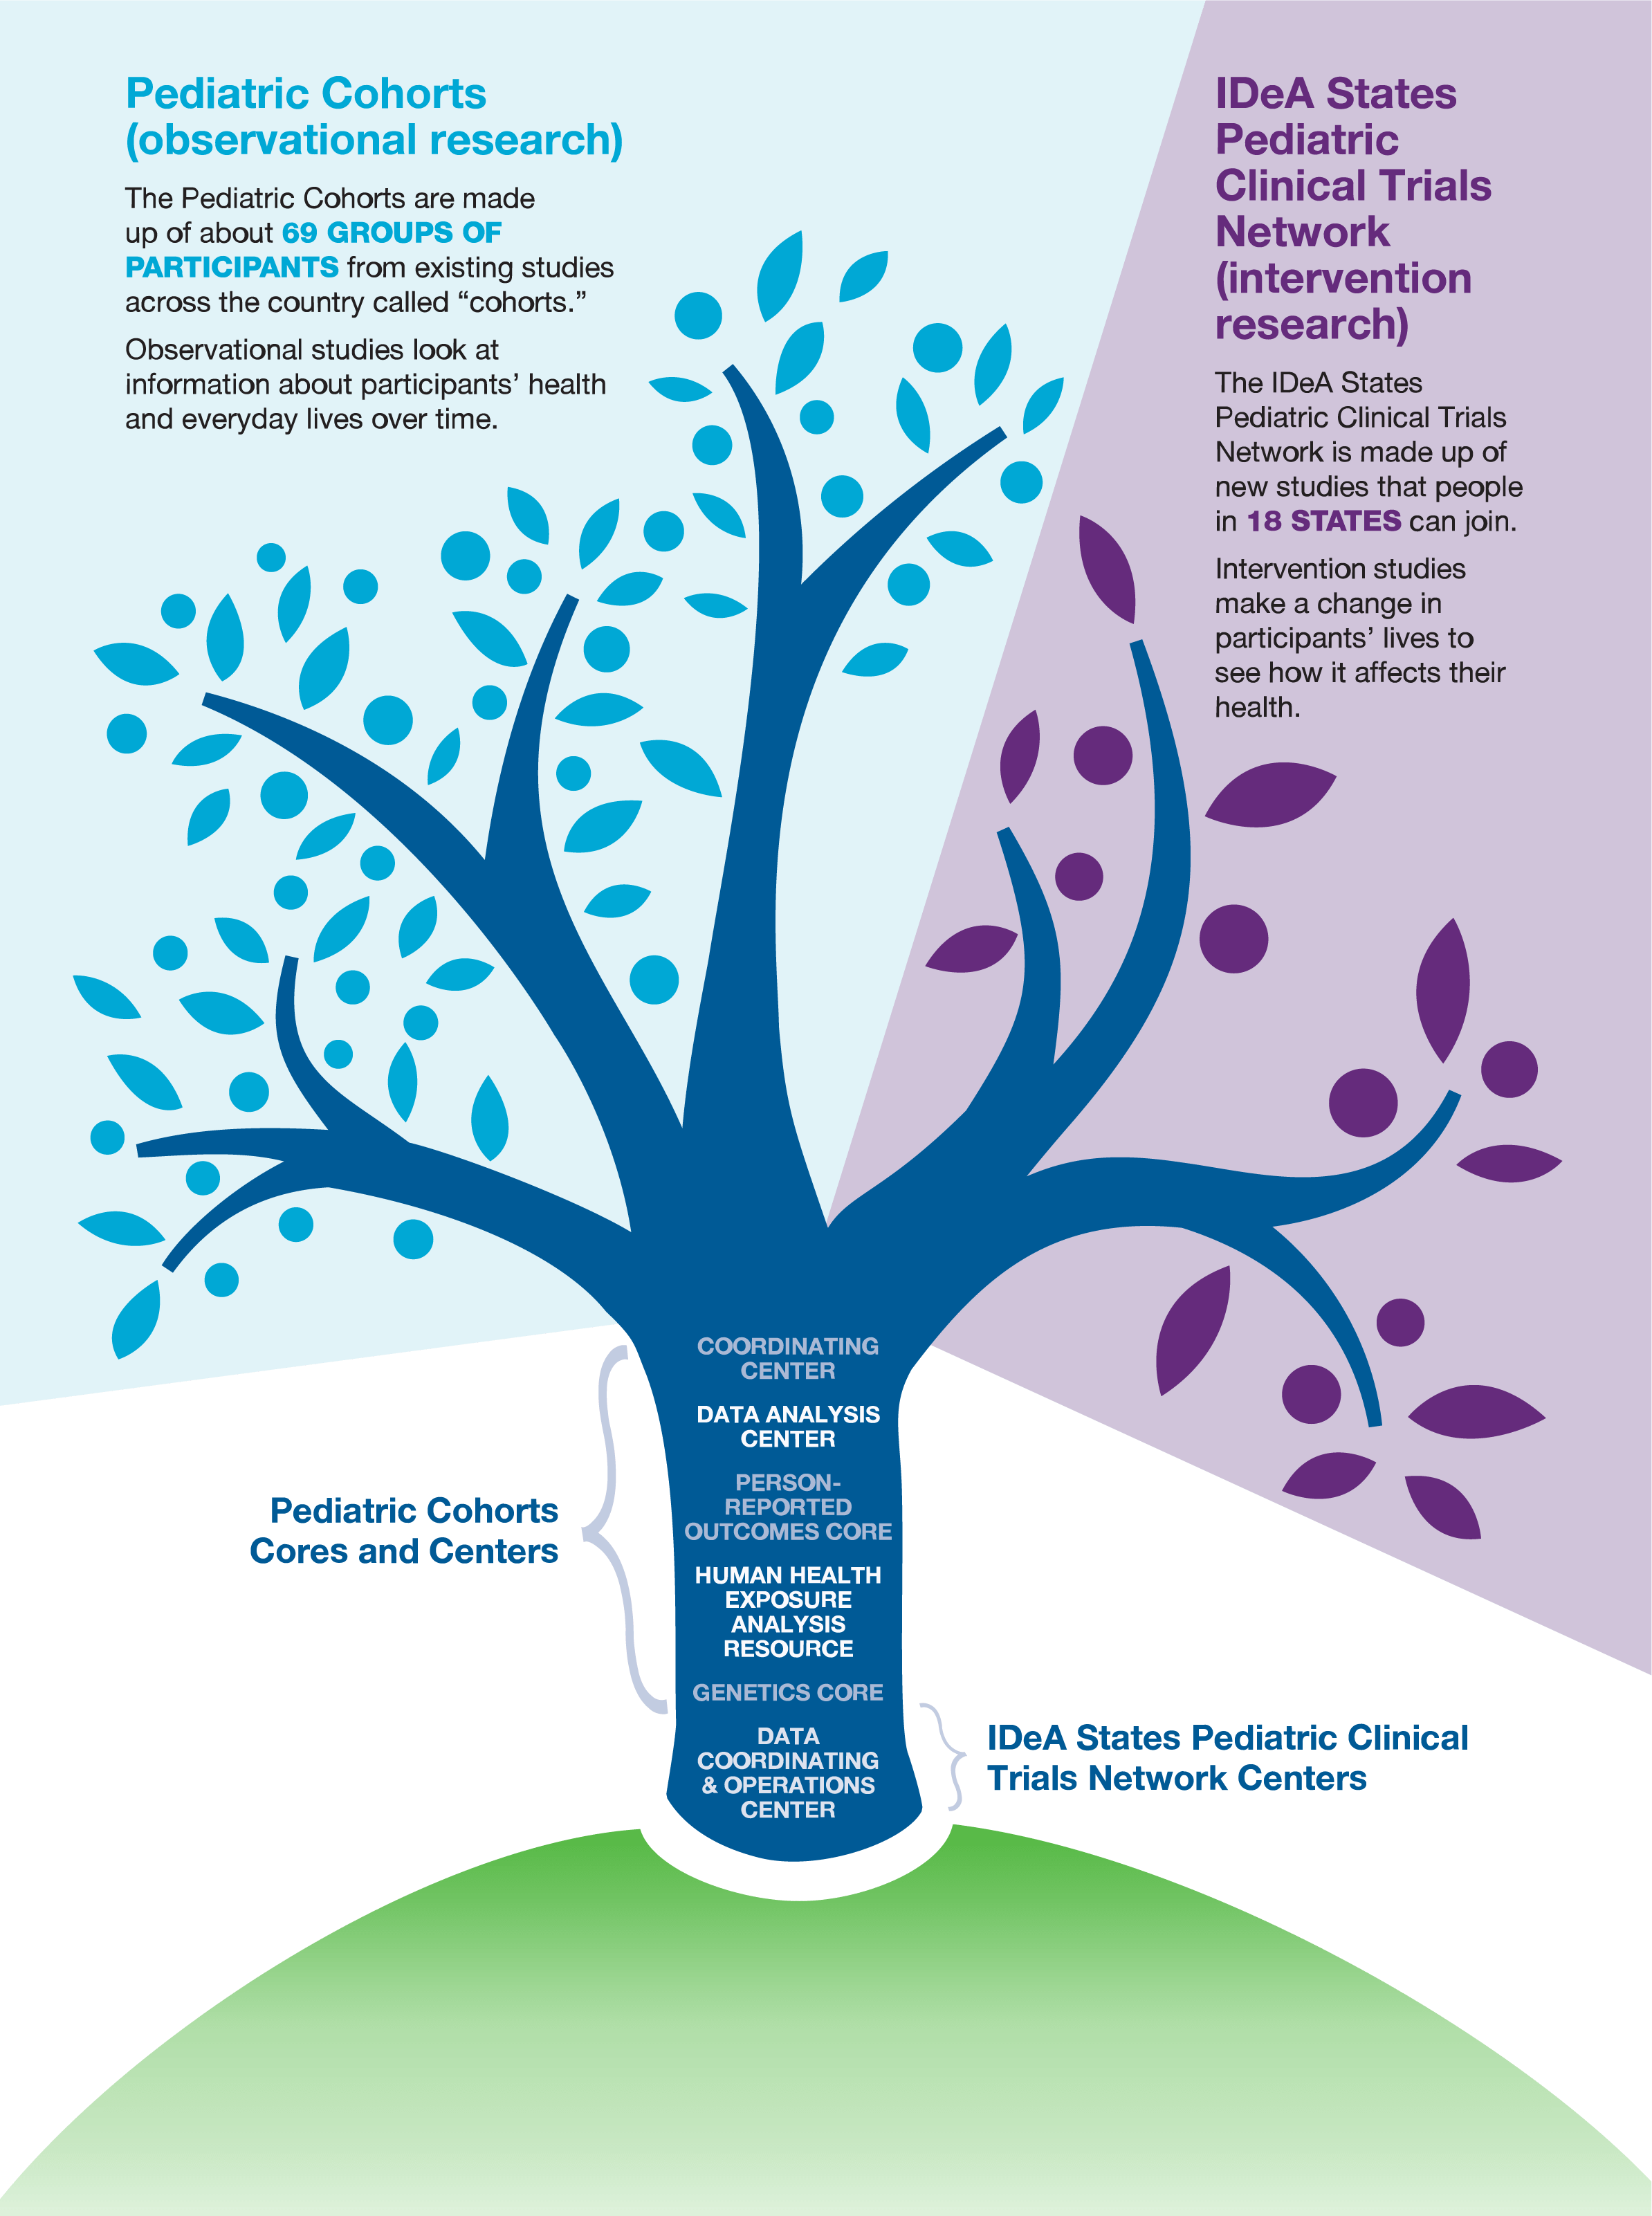 Illustration of a tree with 2 branches of research, defining observational research for Pediatric Cohorts and intervention research for IDeA States Pediatric Trials Network Intervention